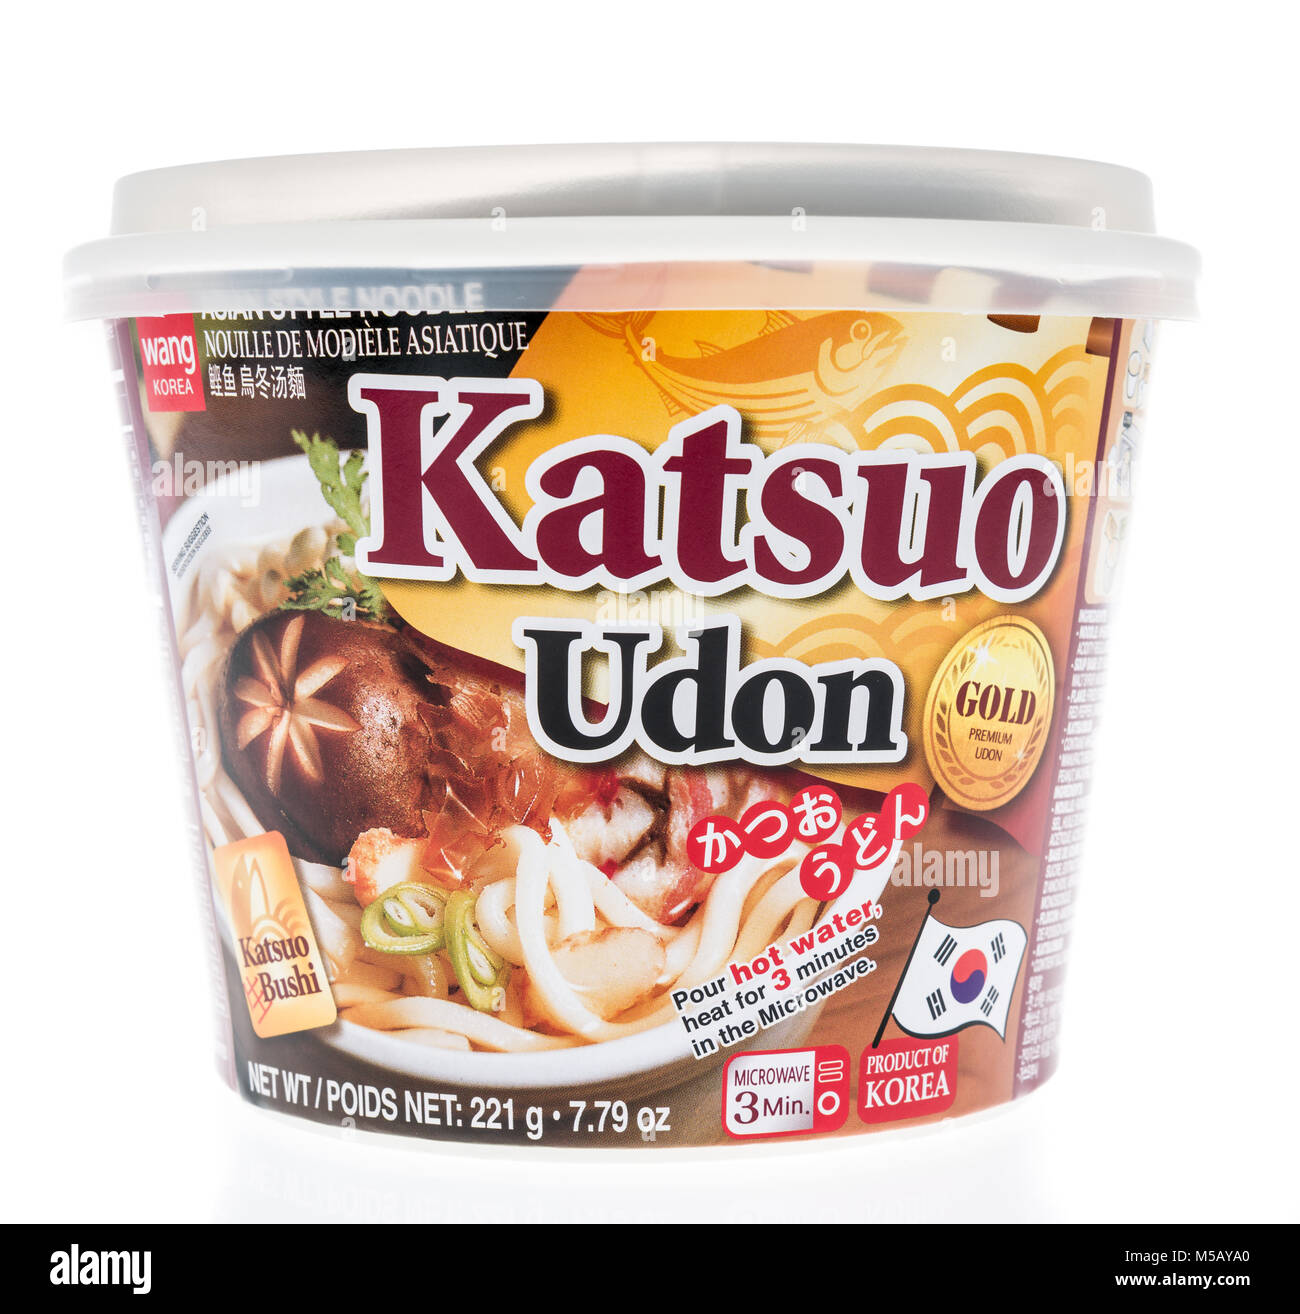 Winneconne, WI - 2 January 2018: A package of Katsuo Udon Asian style noodle on an isolated background. Stock Photo